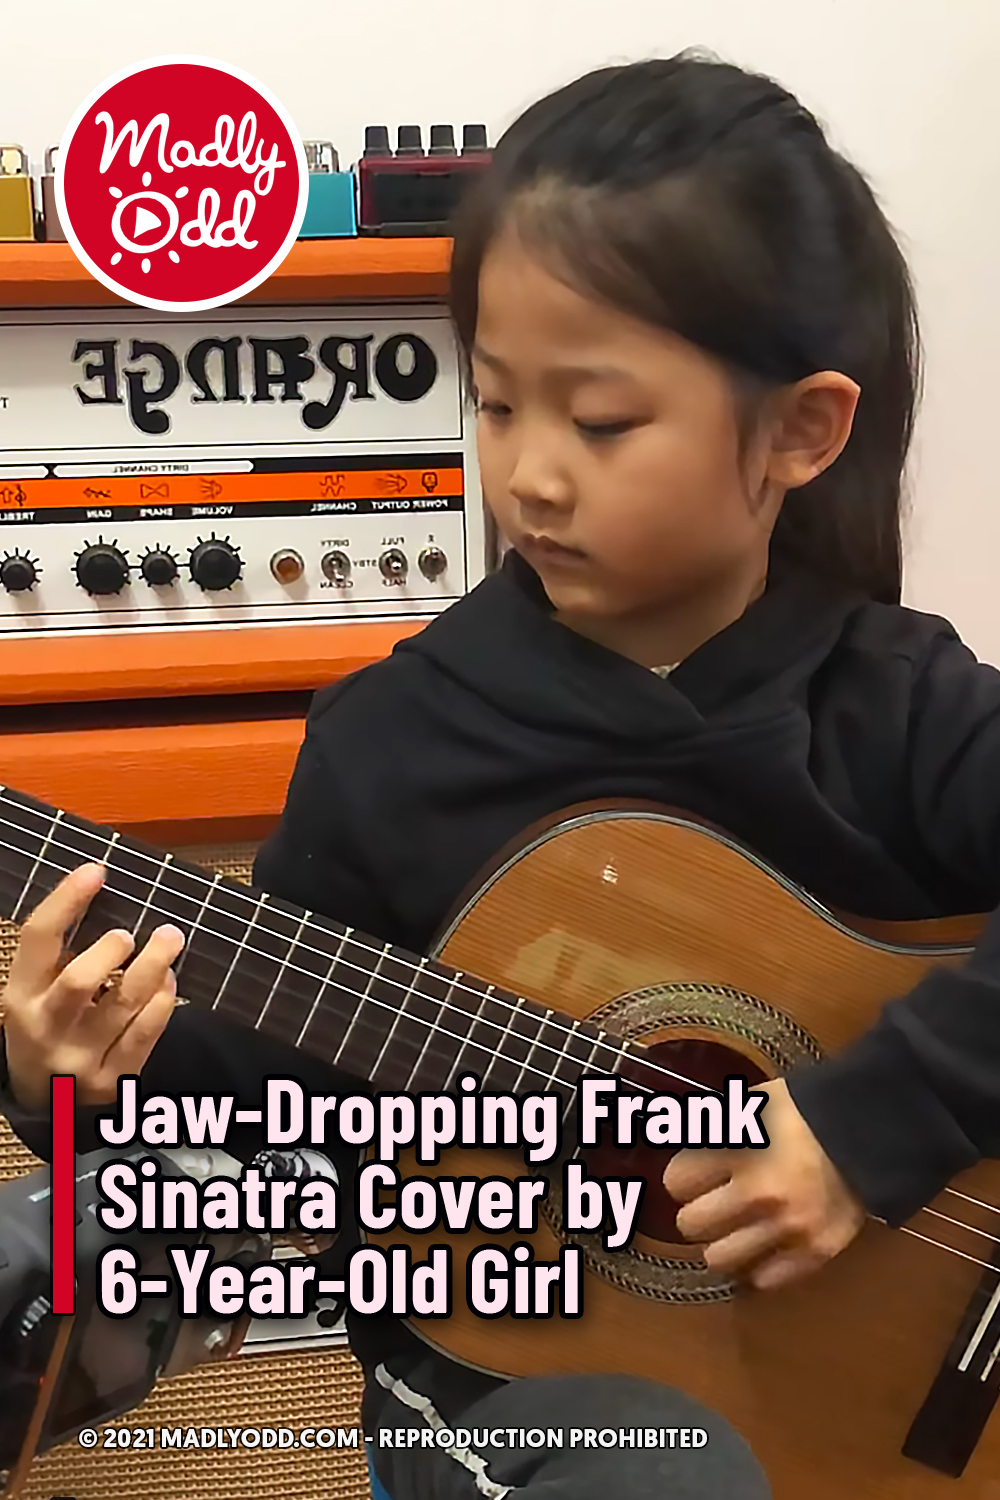 Jaw-Dropping Frank Sinatra Cover by 6-Year-Old Girl